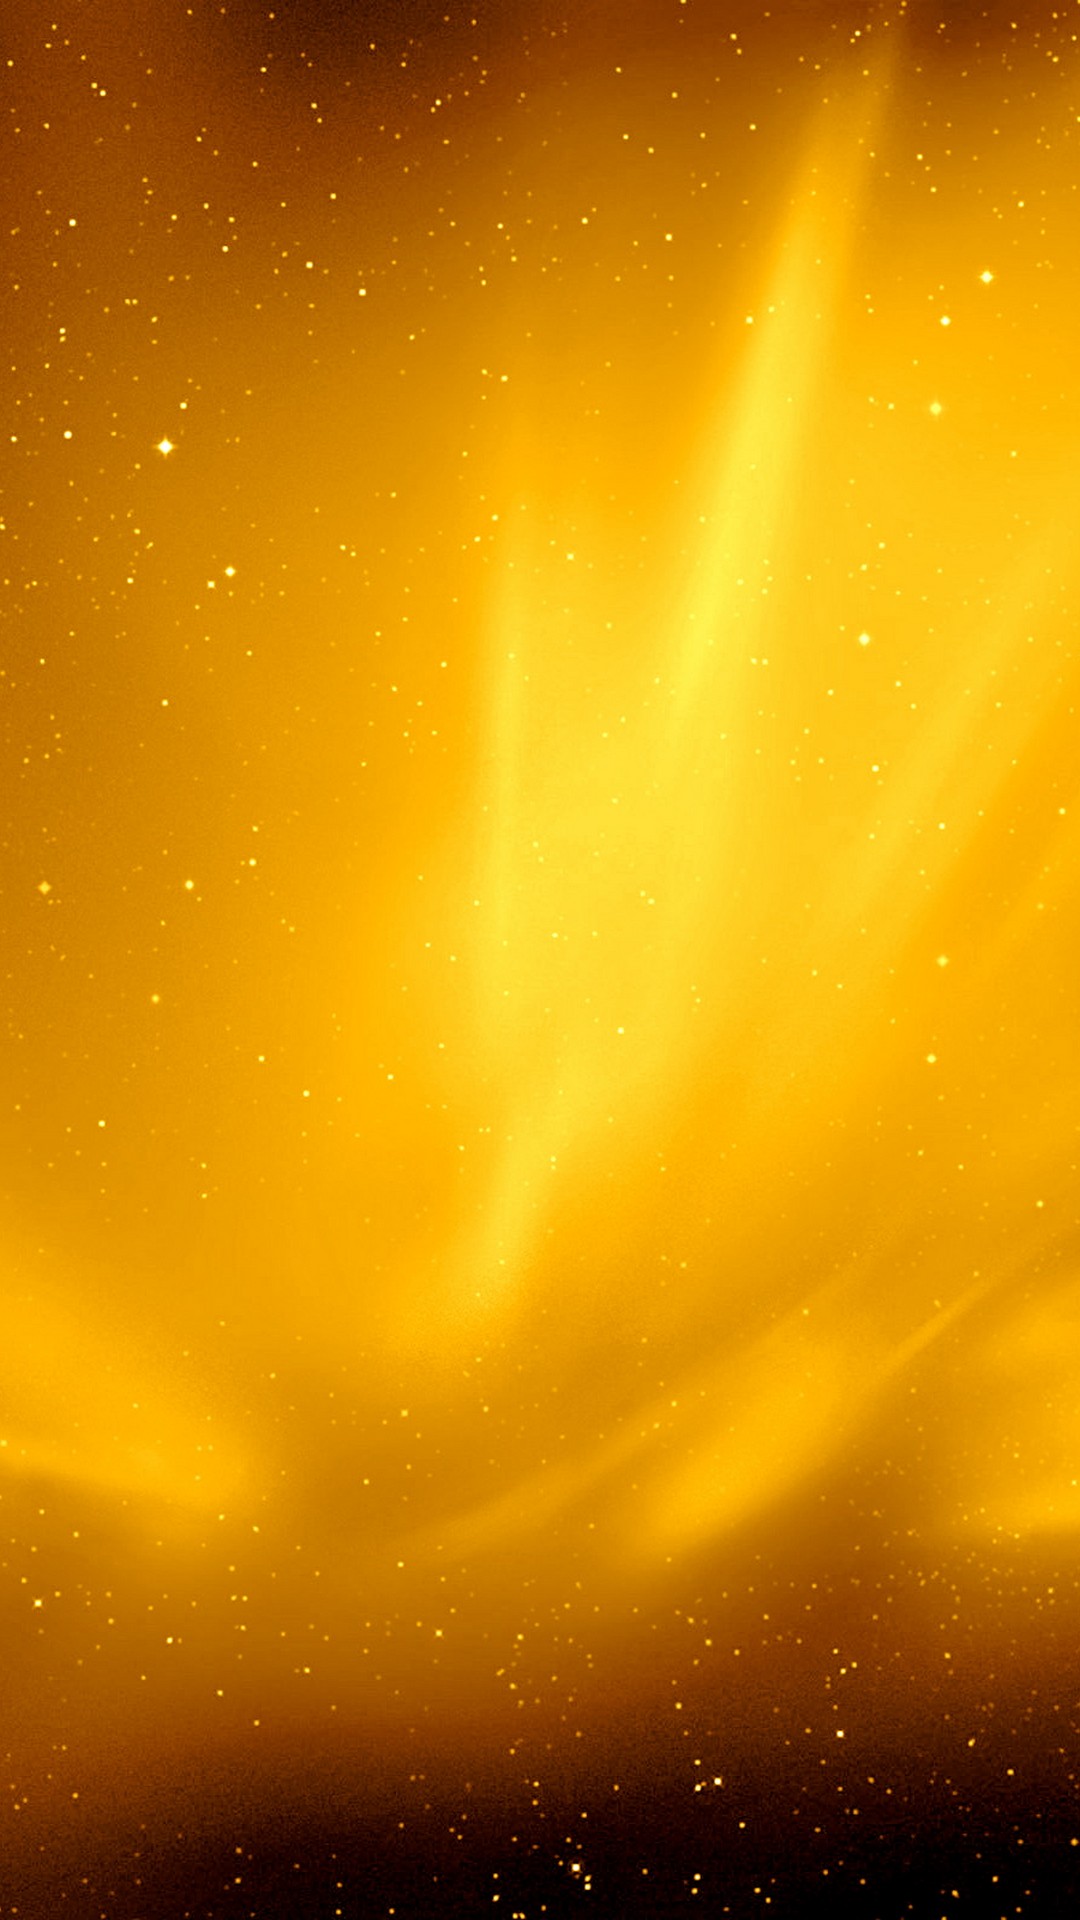 Wallpaper Android Gold Sparkle with HD resolution 1080x1920